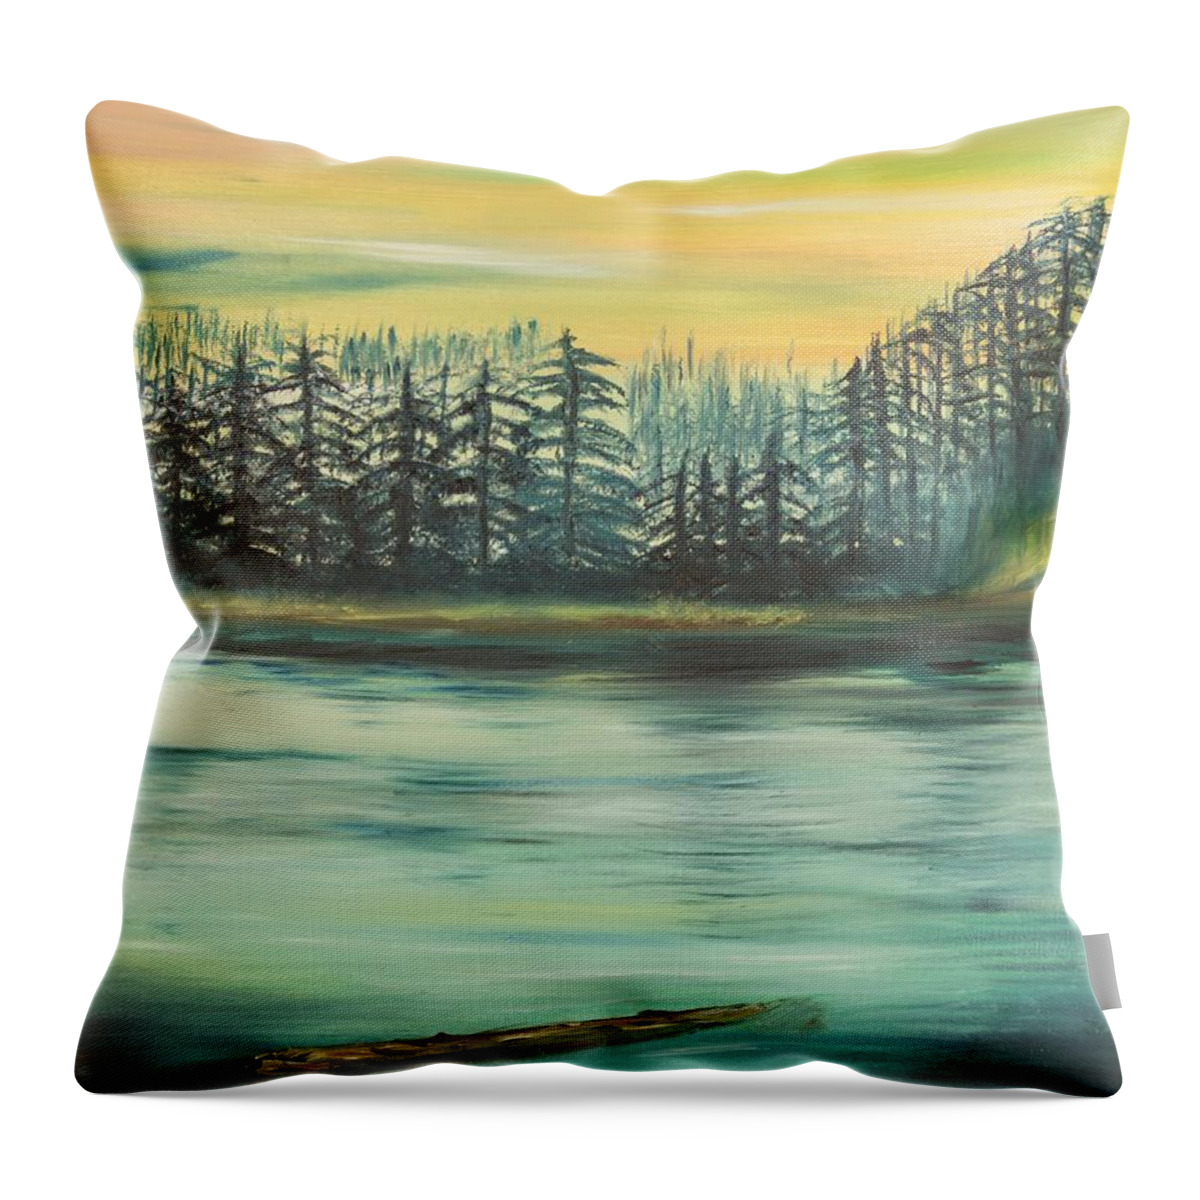 Lake Throw Pillow featuring the painting Mirror Lake by Neslihan Ergul Colley